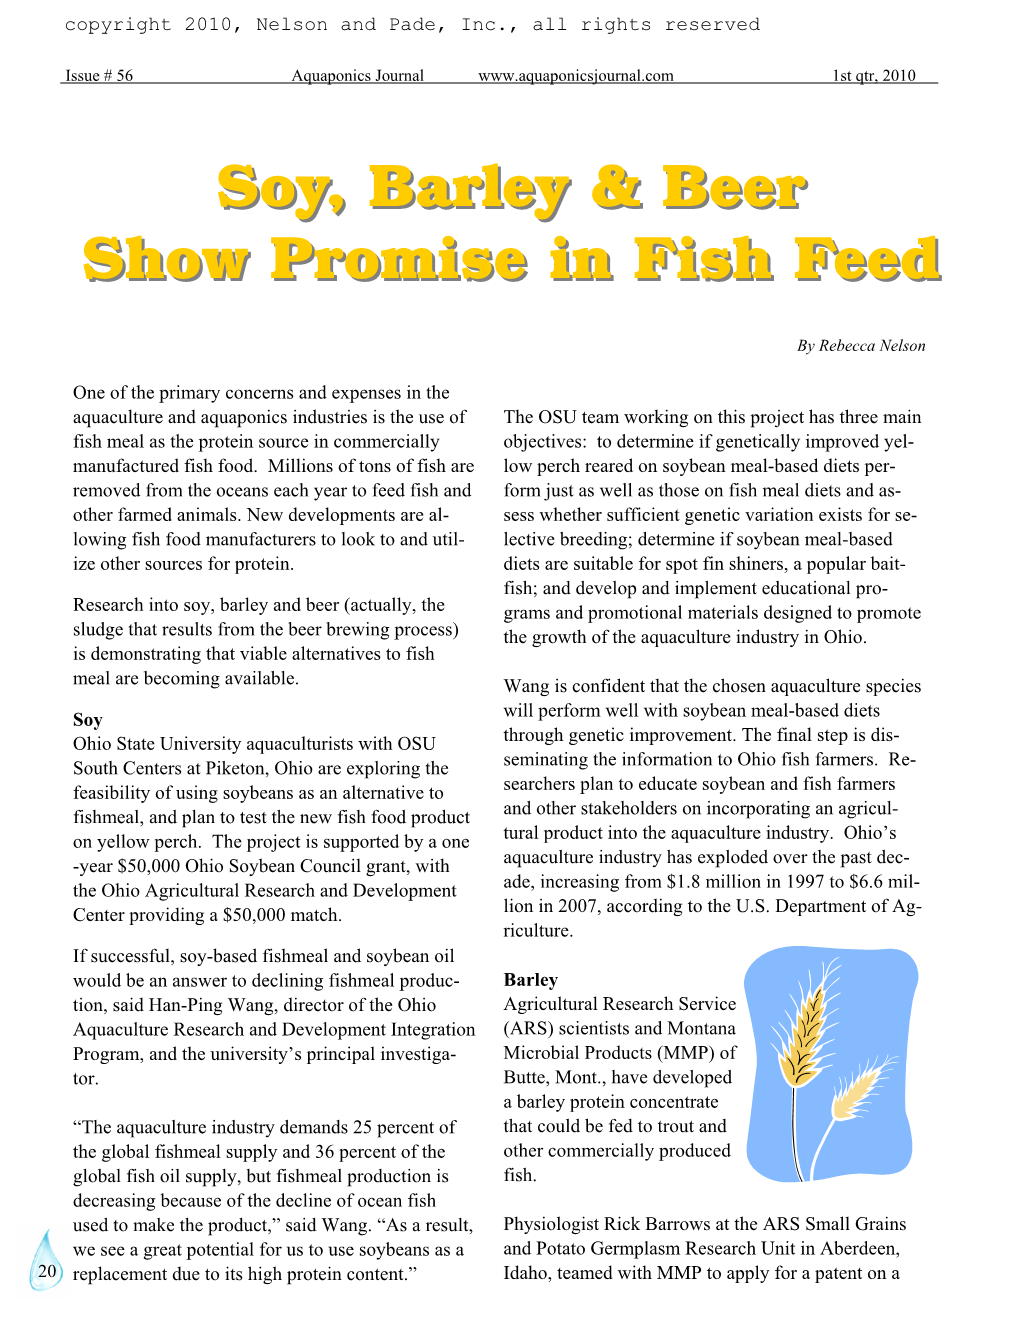 Soy, Barley & Beer Show Promise in Fish Feed